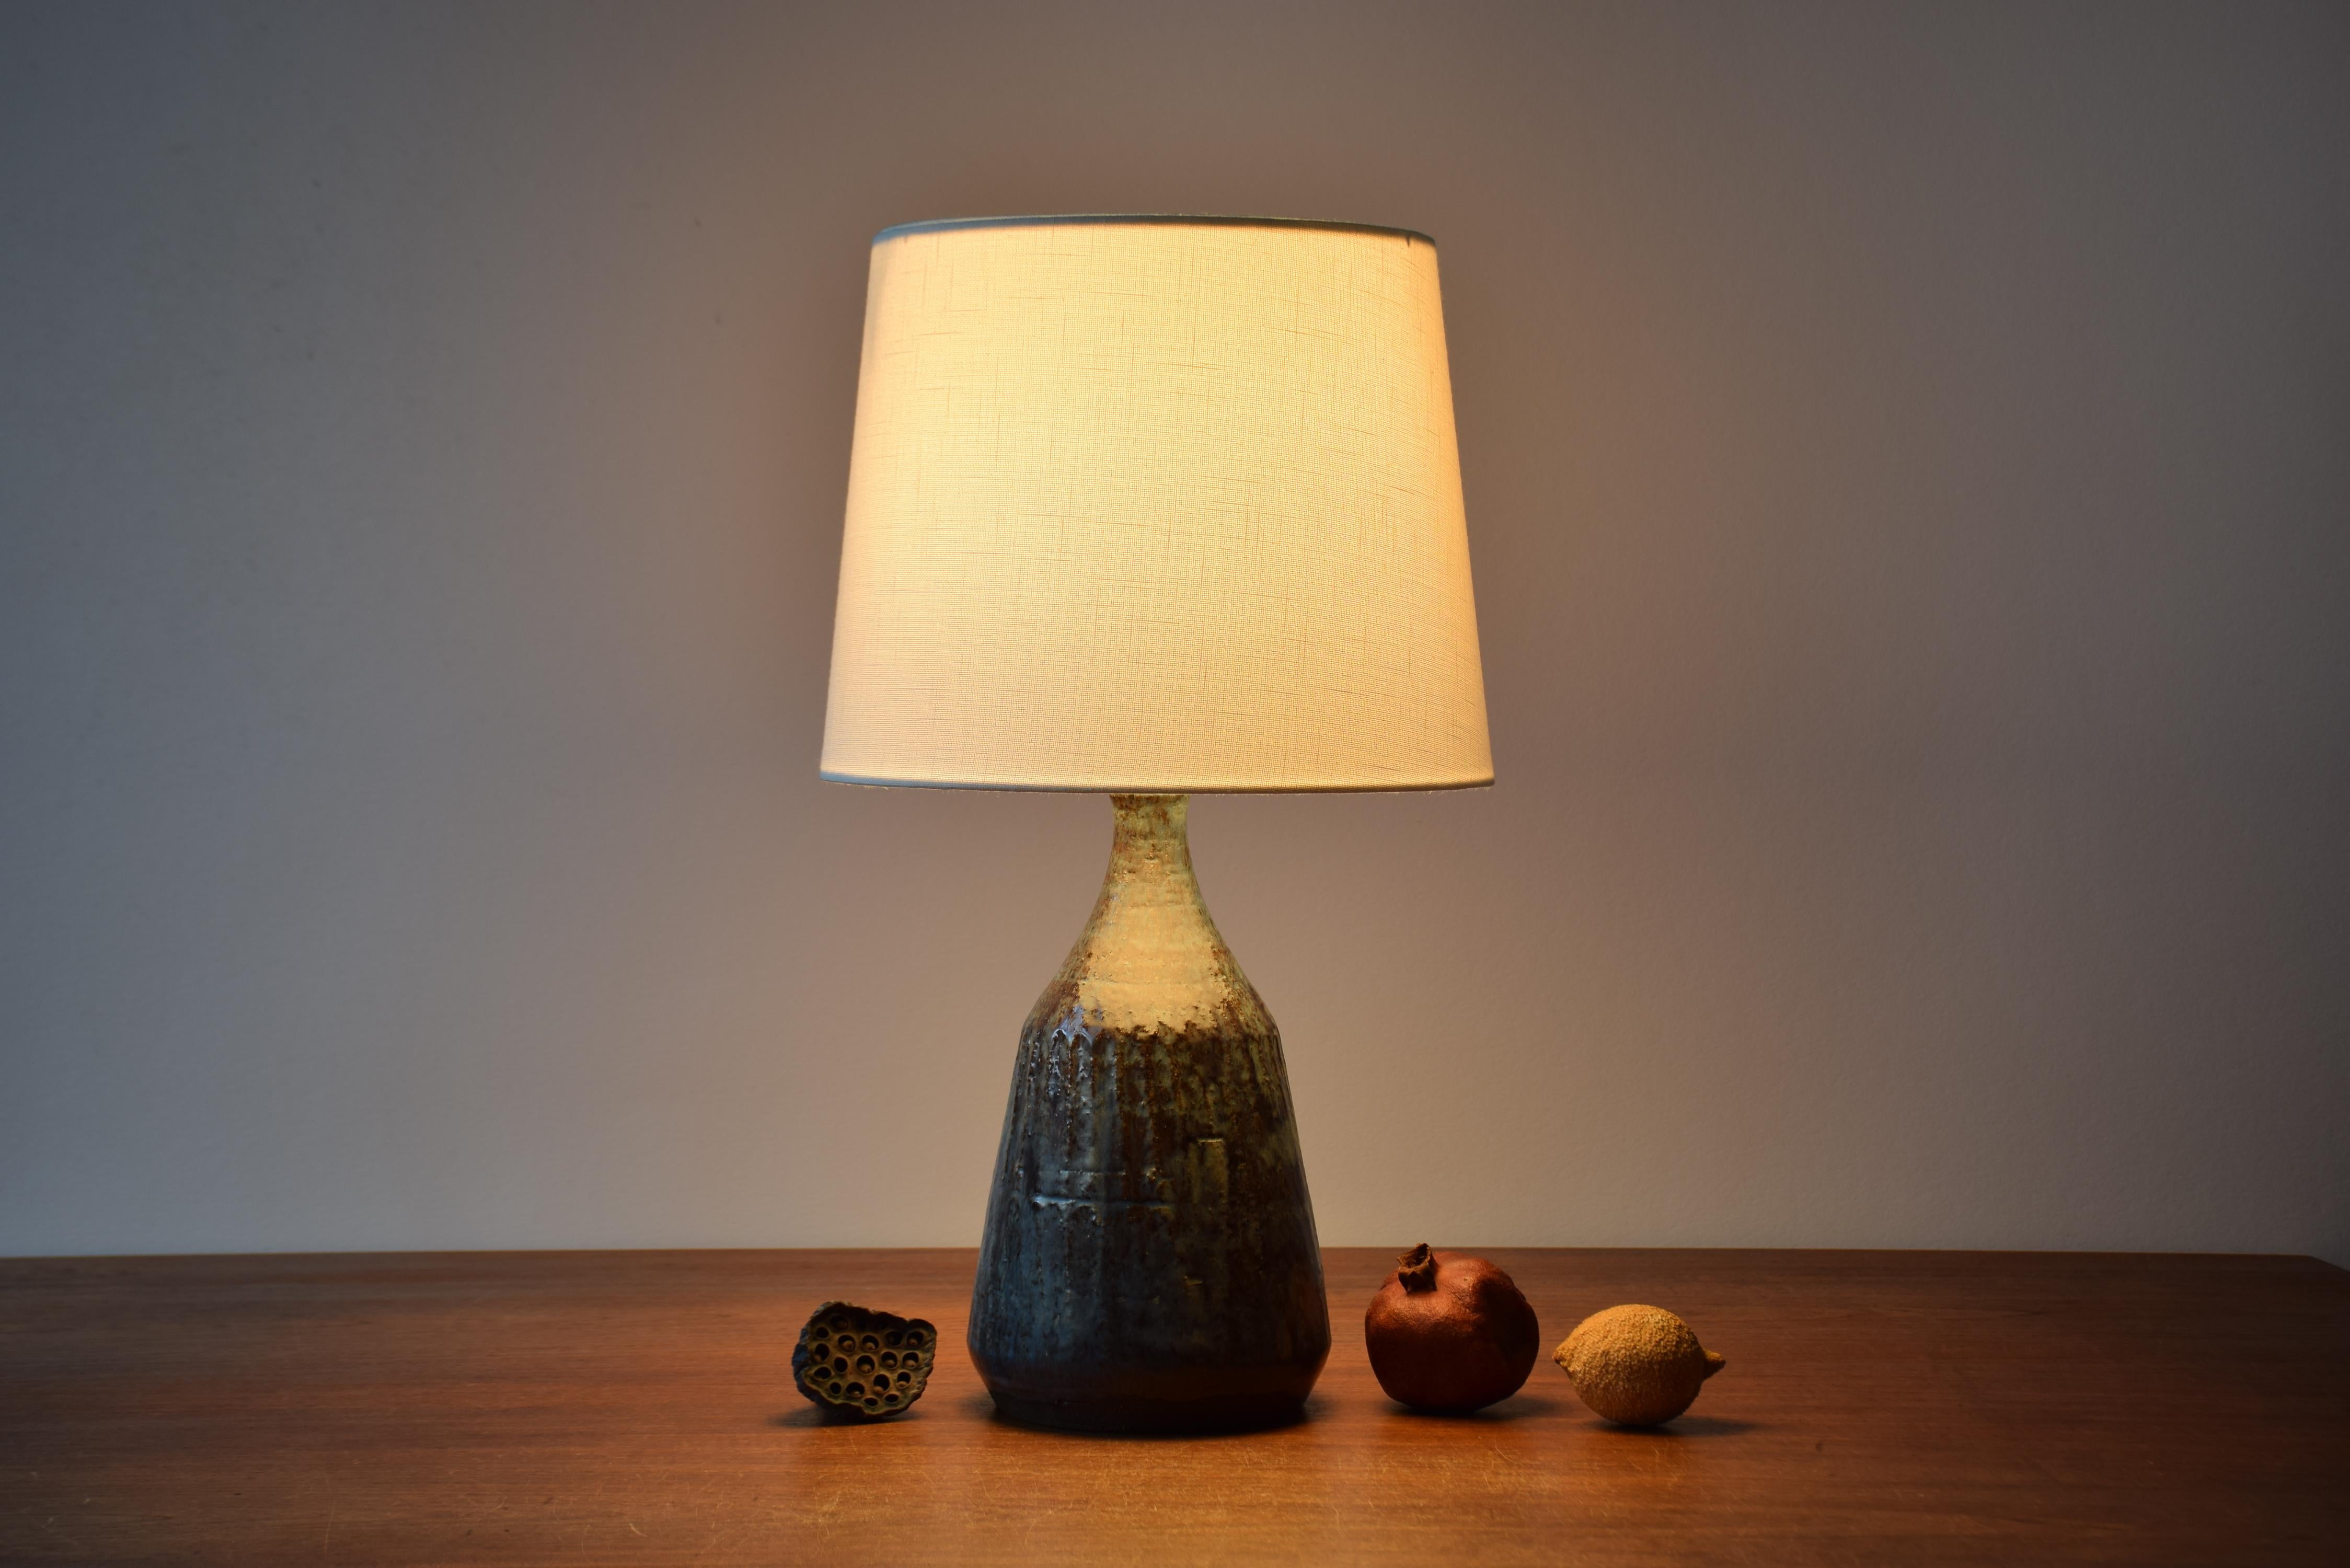 Mid-century ceramic table lamp from a Danish studio workshop. Made ca. 1950s to 1960s.

The lamp has a blue and brown glaze.

The lamp isn't signed and the designer is unknown. The style is reminiscent of Gutte Eriksen.

The lamp wears the